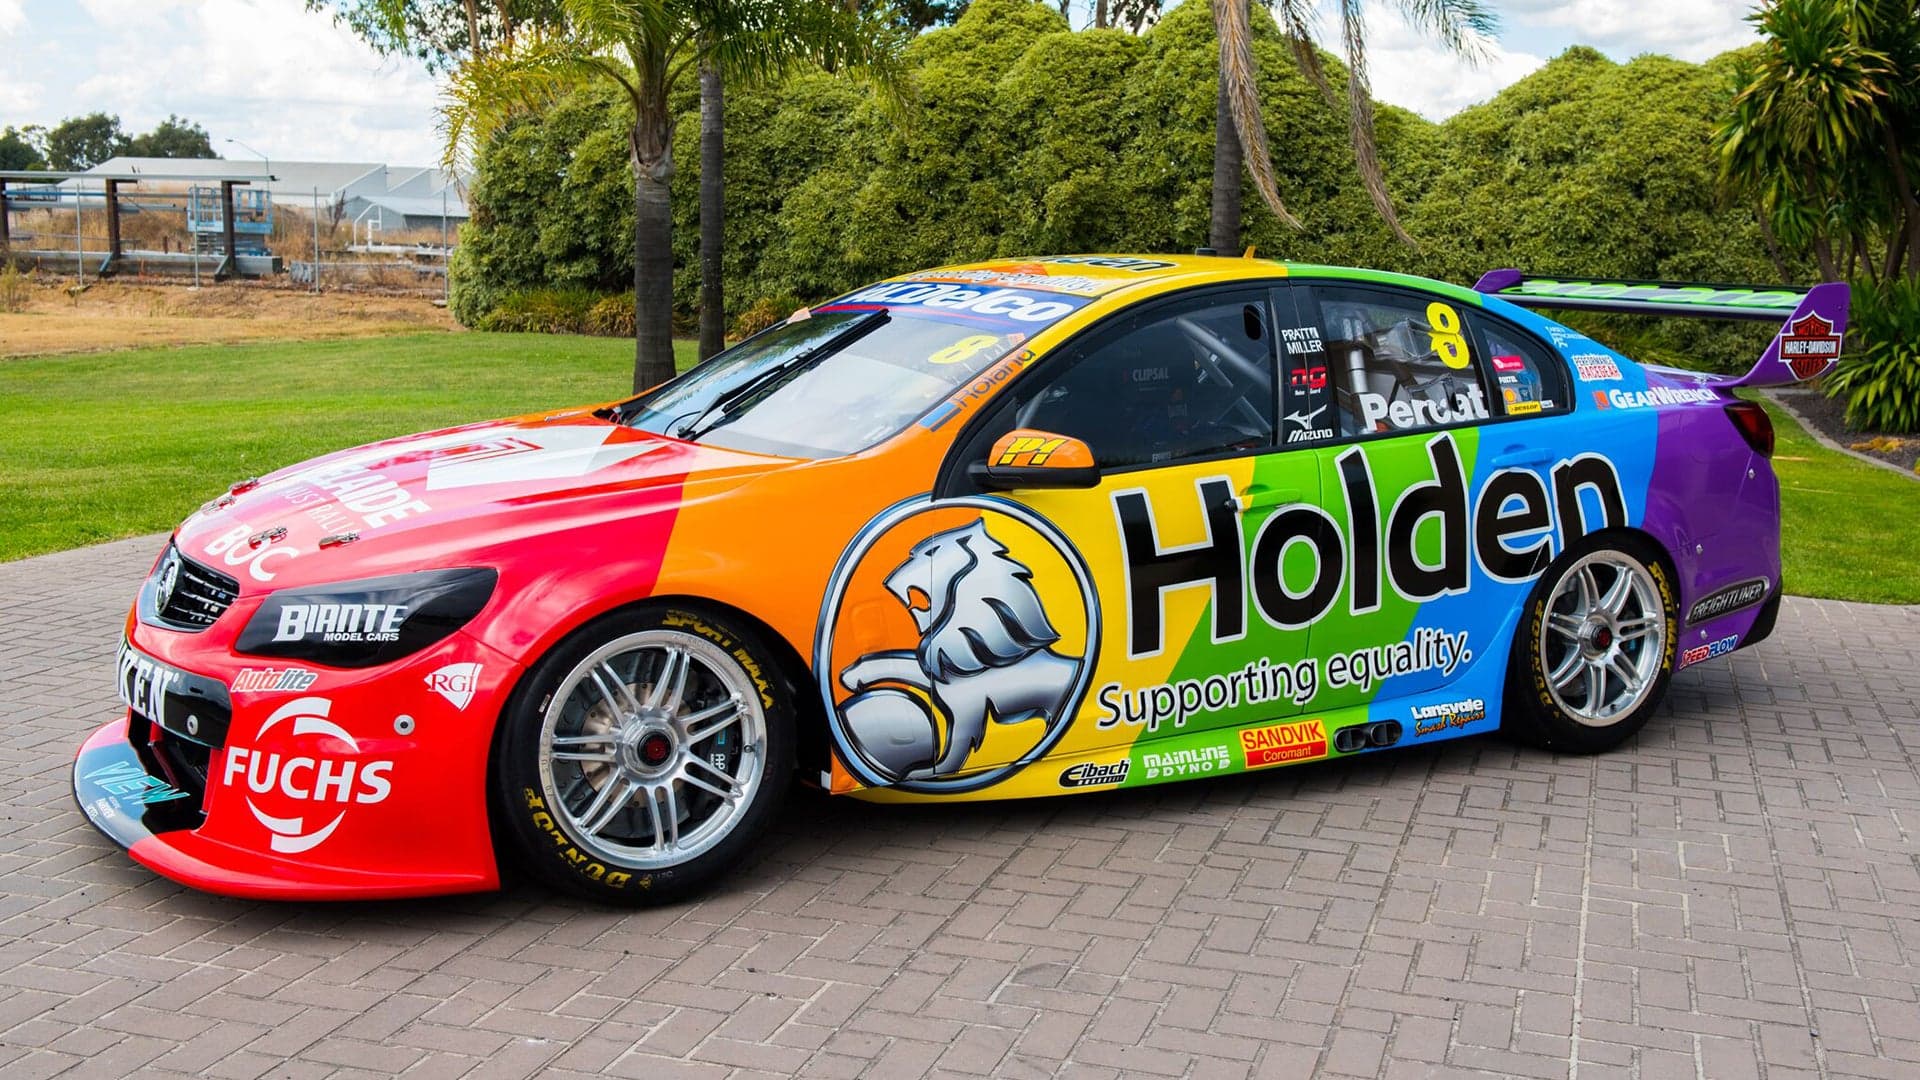 Holden Commodore Supporting Equality Makes Formula One Australia Debut